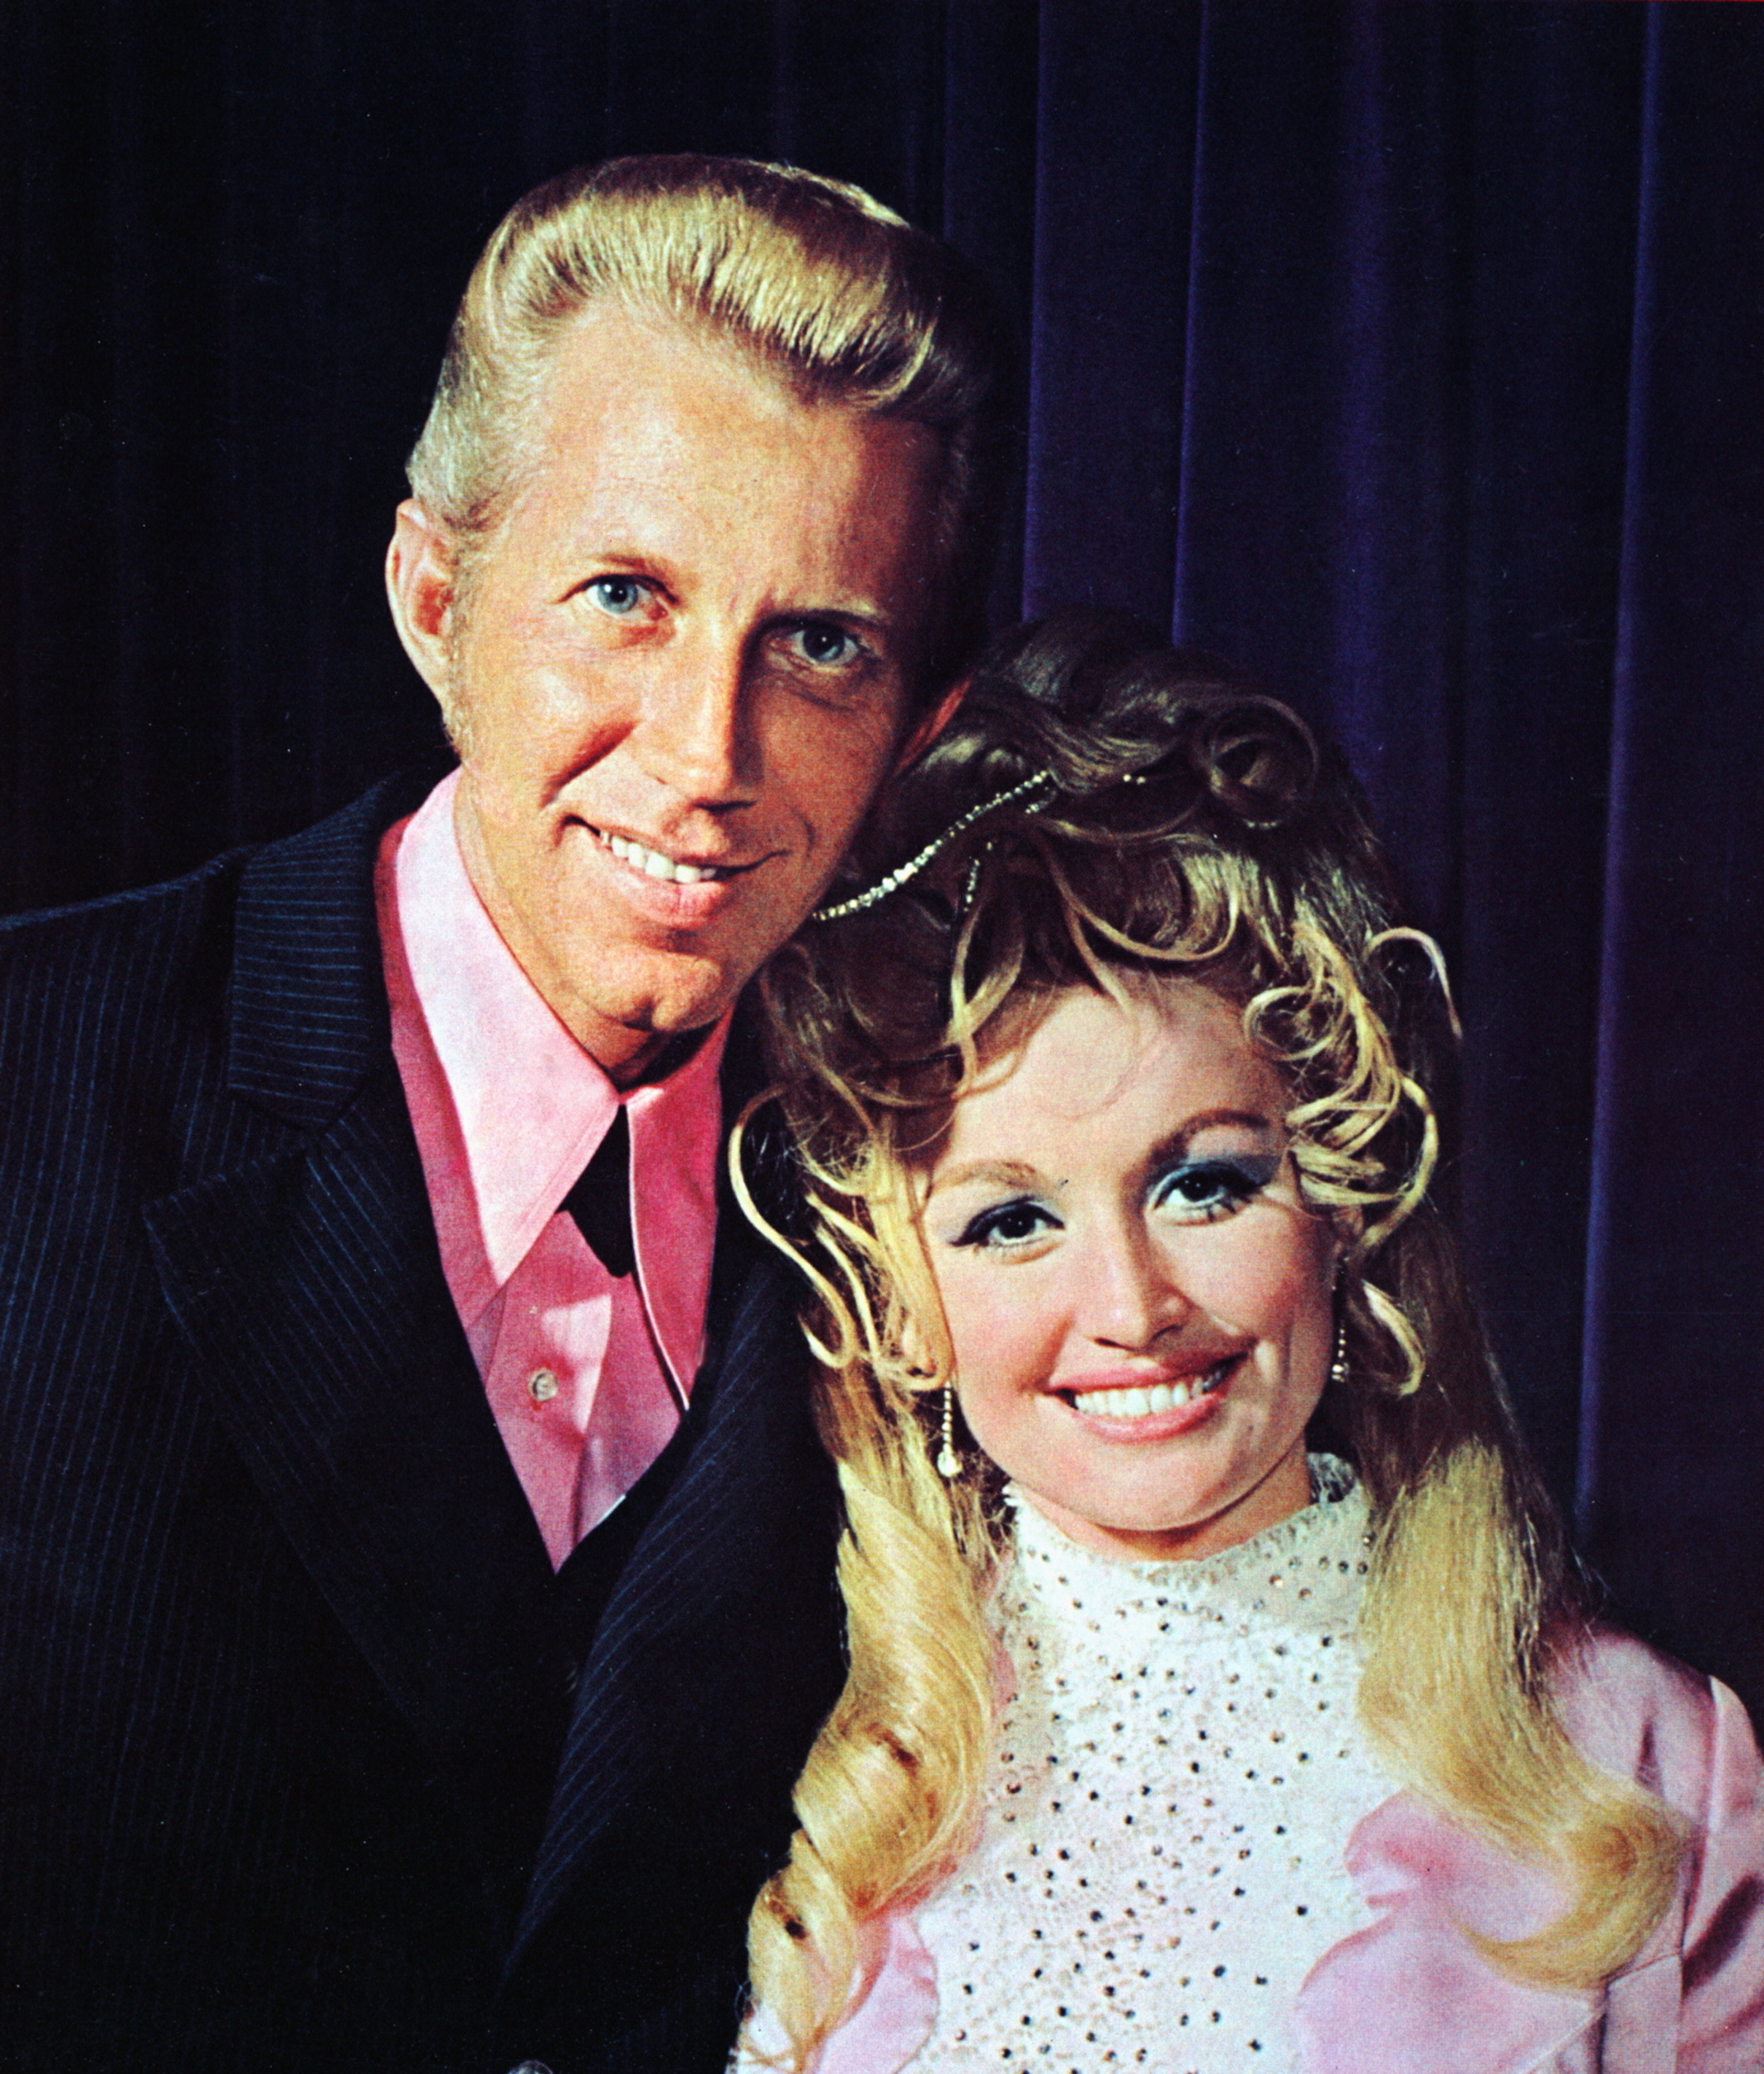 <p>Despite the decades-long collaboration between Dolly Parton and Porter Wagoner, "Please Don't Stop Loving Me" is the legendary duo's sole #1 hit. It was released in 1974 on "Porter n' Dolly," and remains a fan favorite. </p>